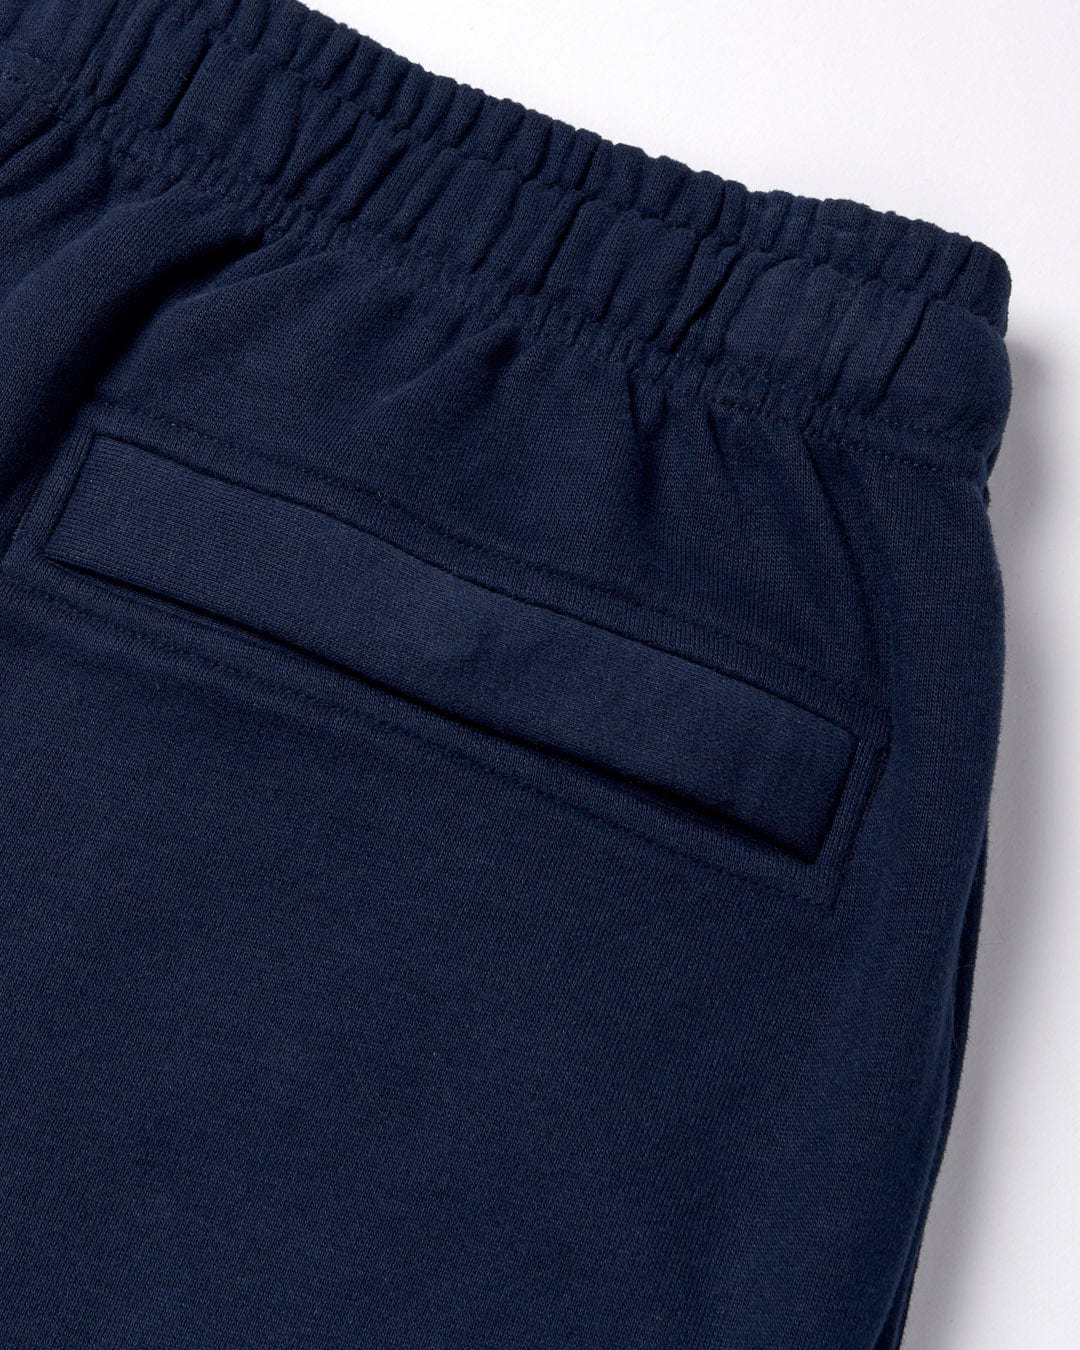 Close-up of a Saltrock Original - Mens Joggers - Dark Blue waistband with a back pocket detail and peach fluff lining.